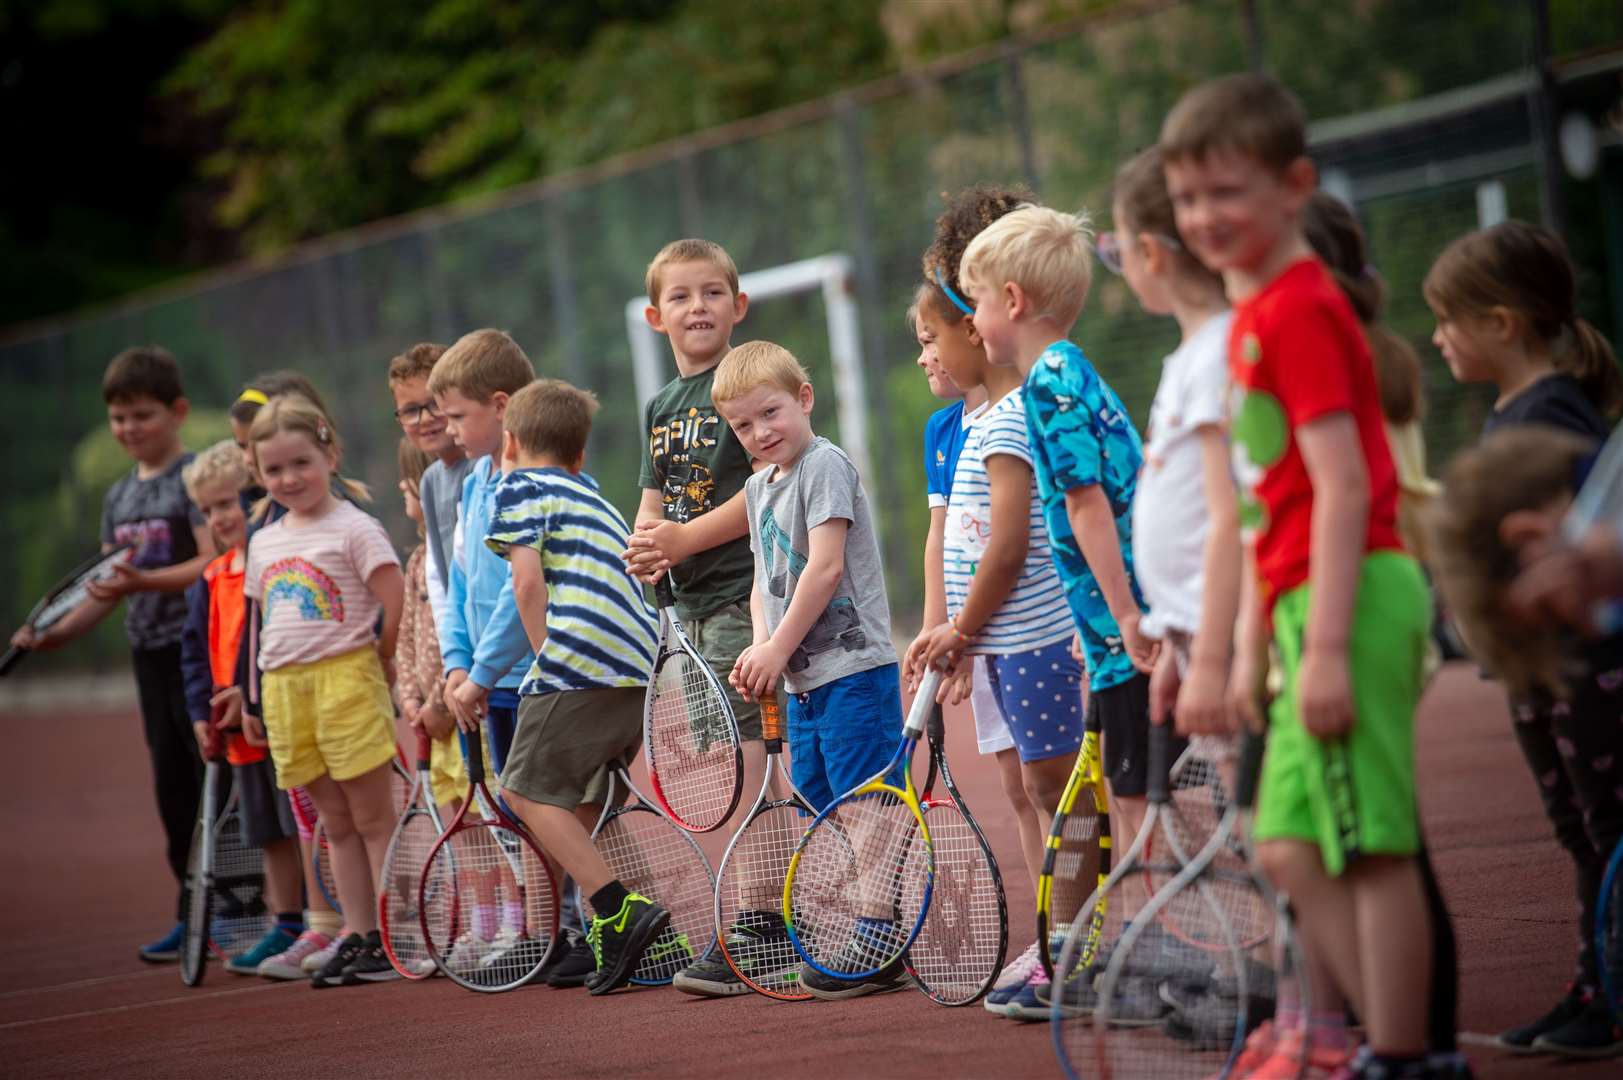 Kids learning how to play tennis. Picture: Callum Mackay